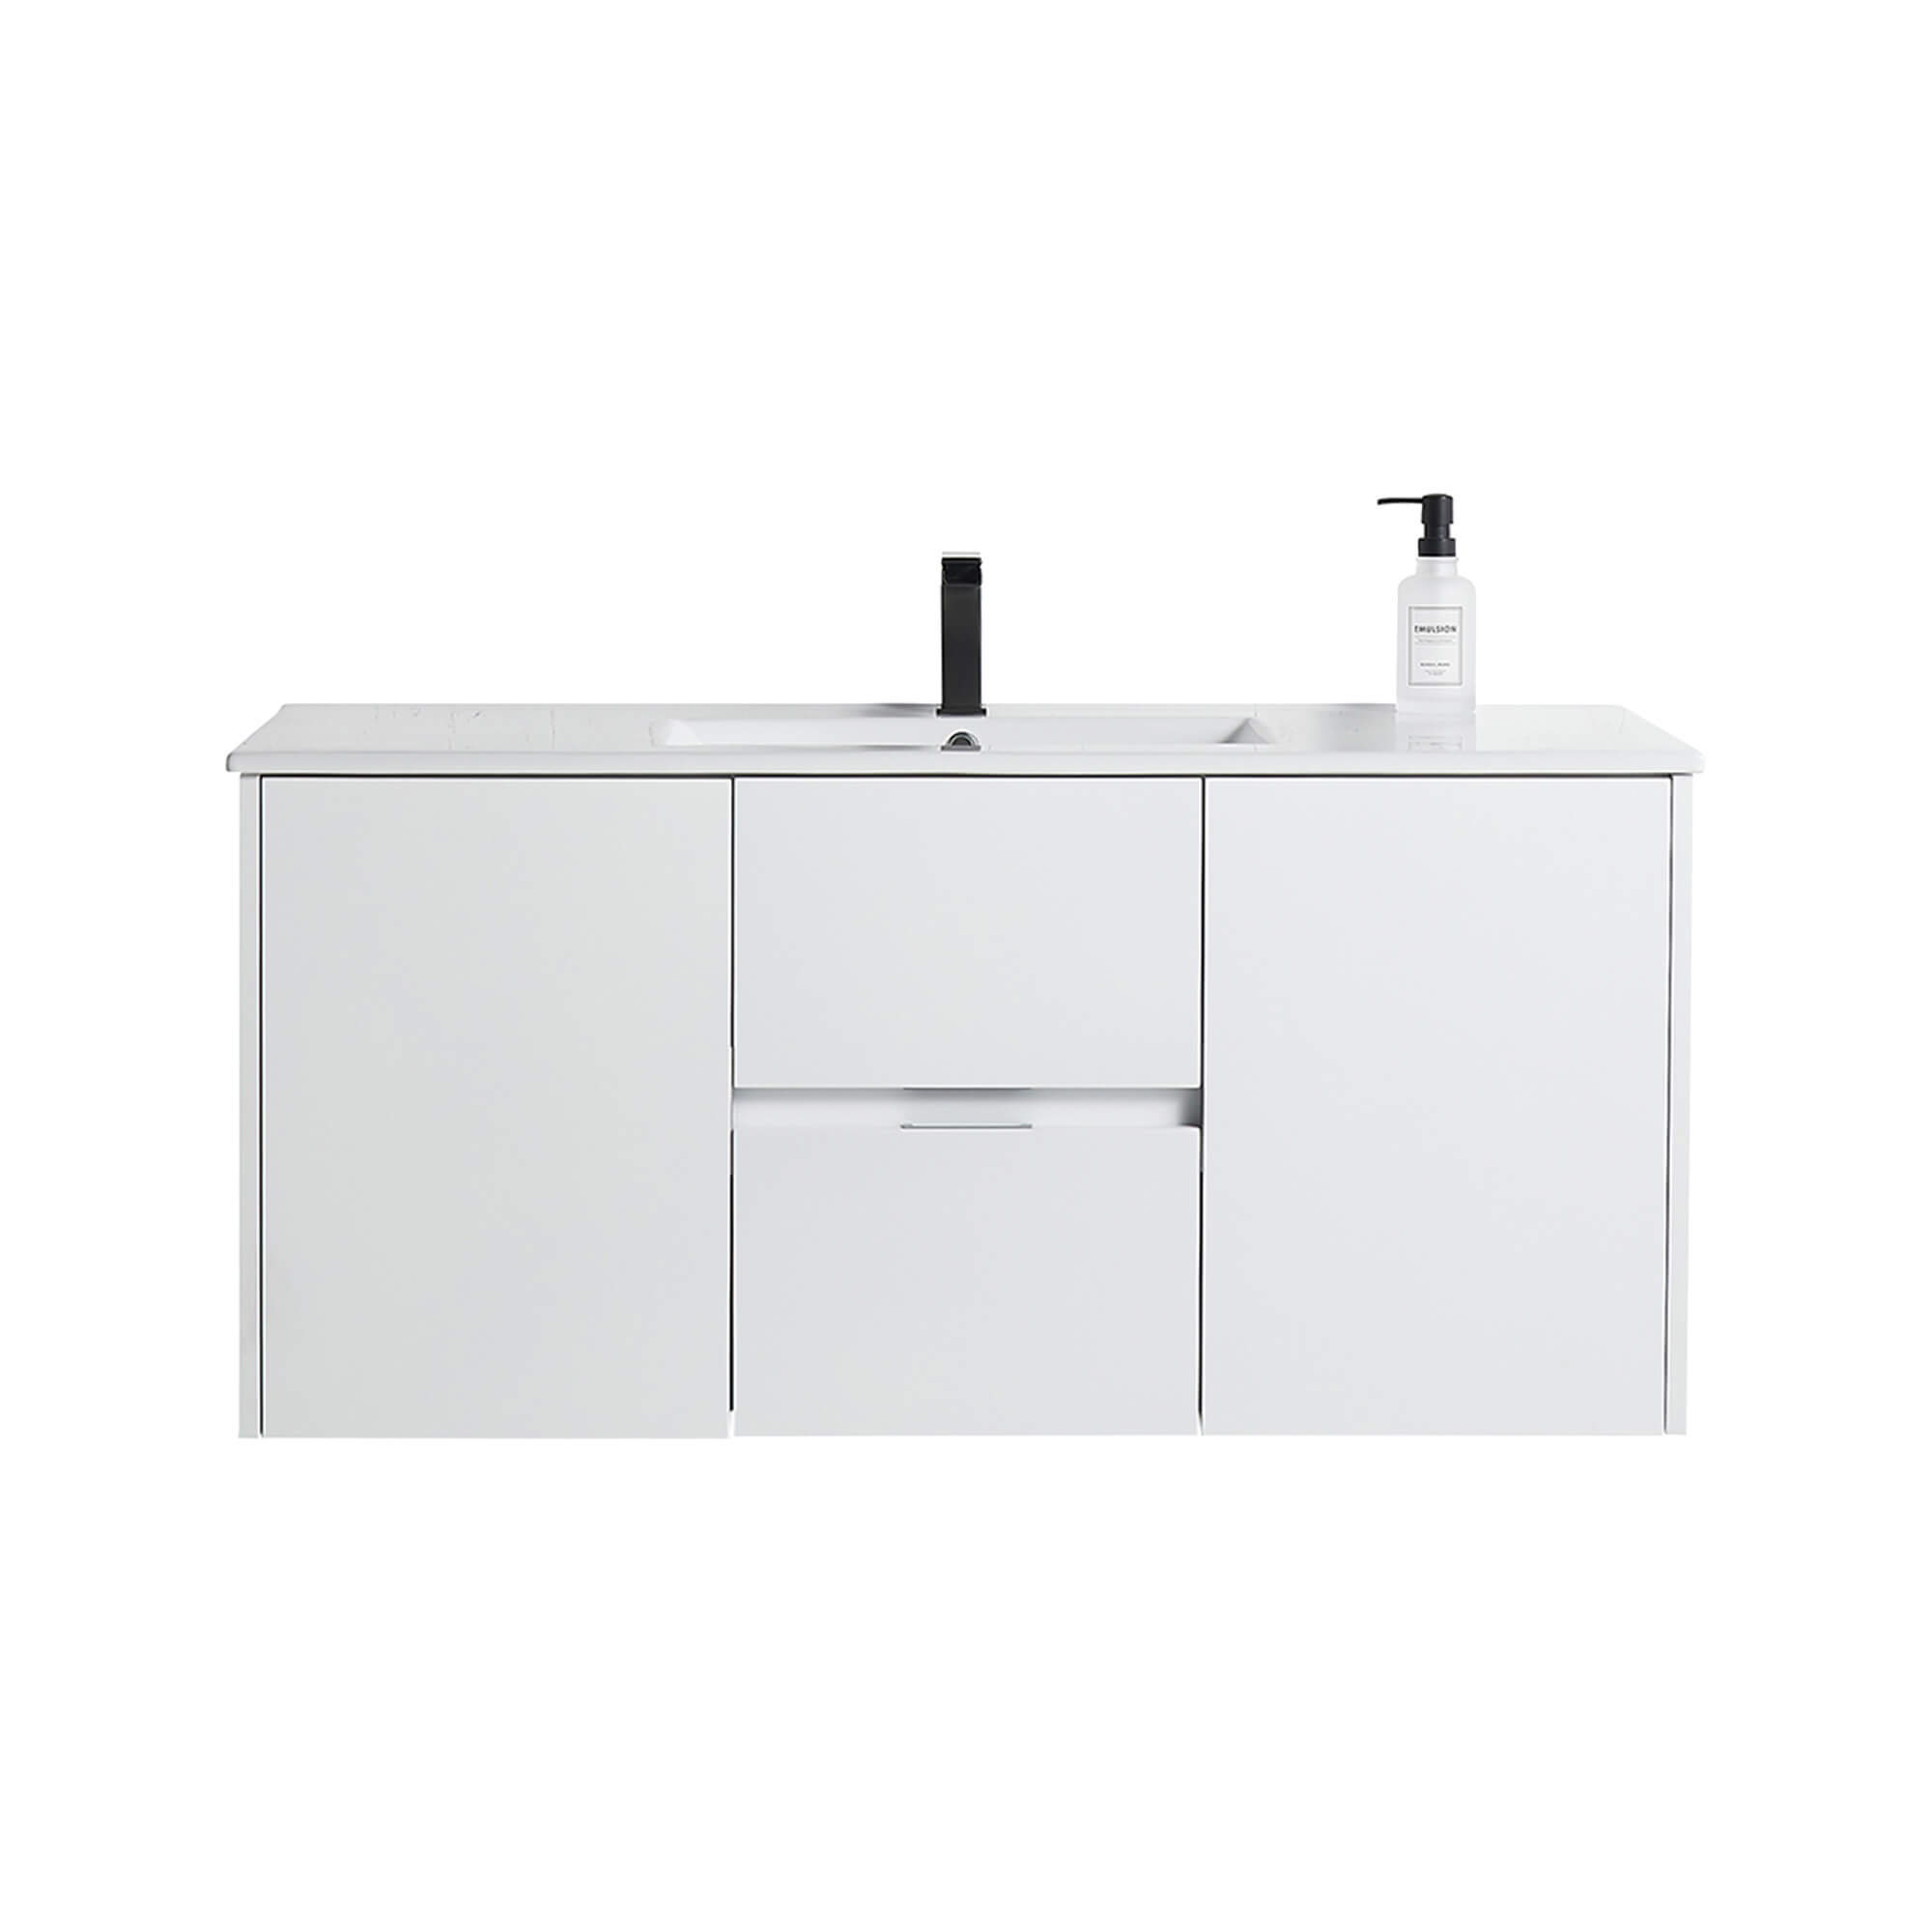 CASAINC 48-in Single Sink Bathroom Vanity in Matte White with White Top